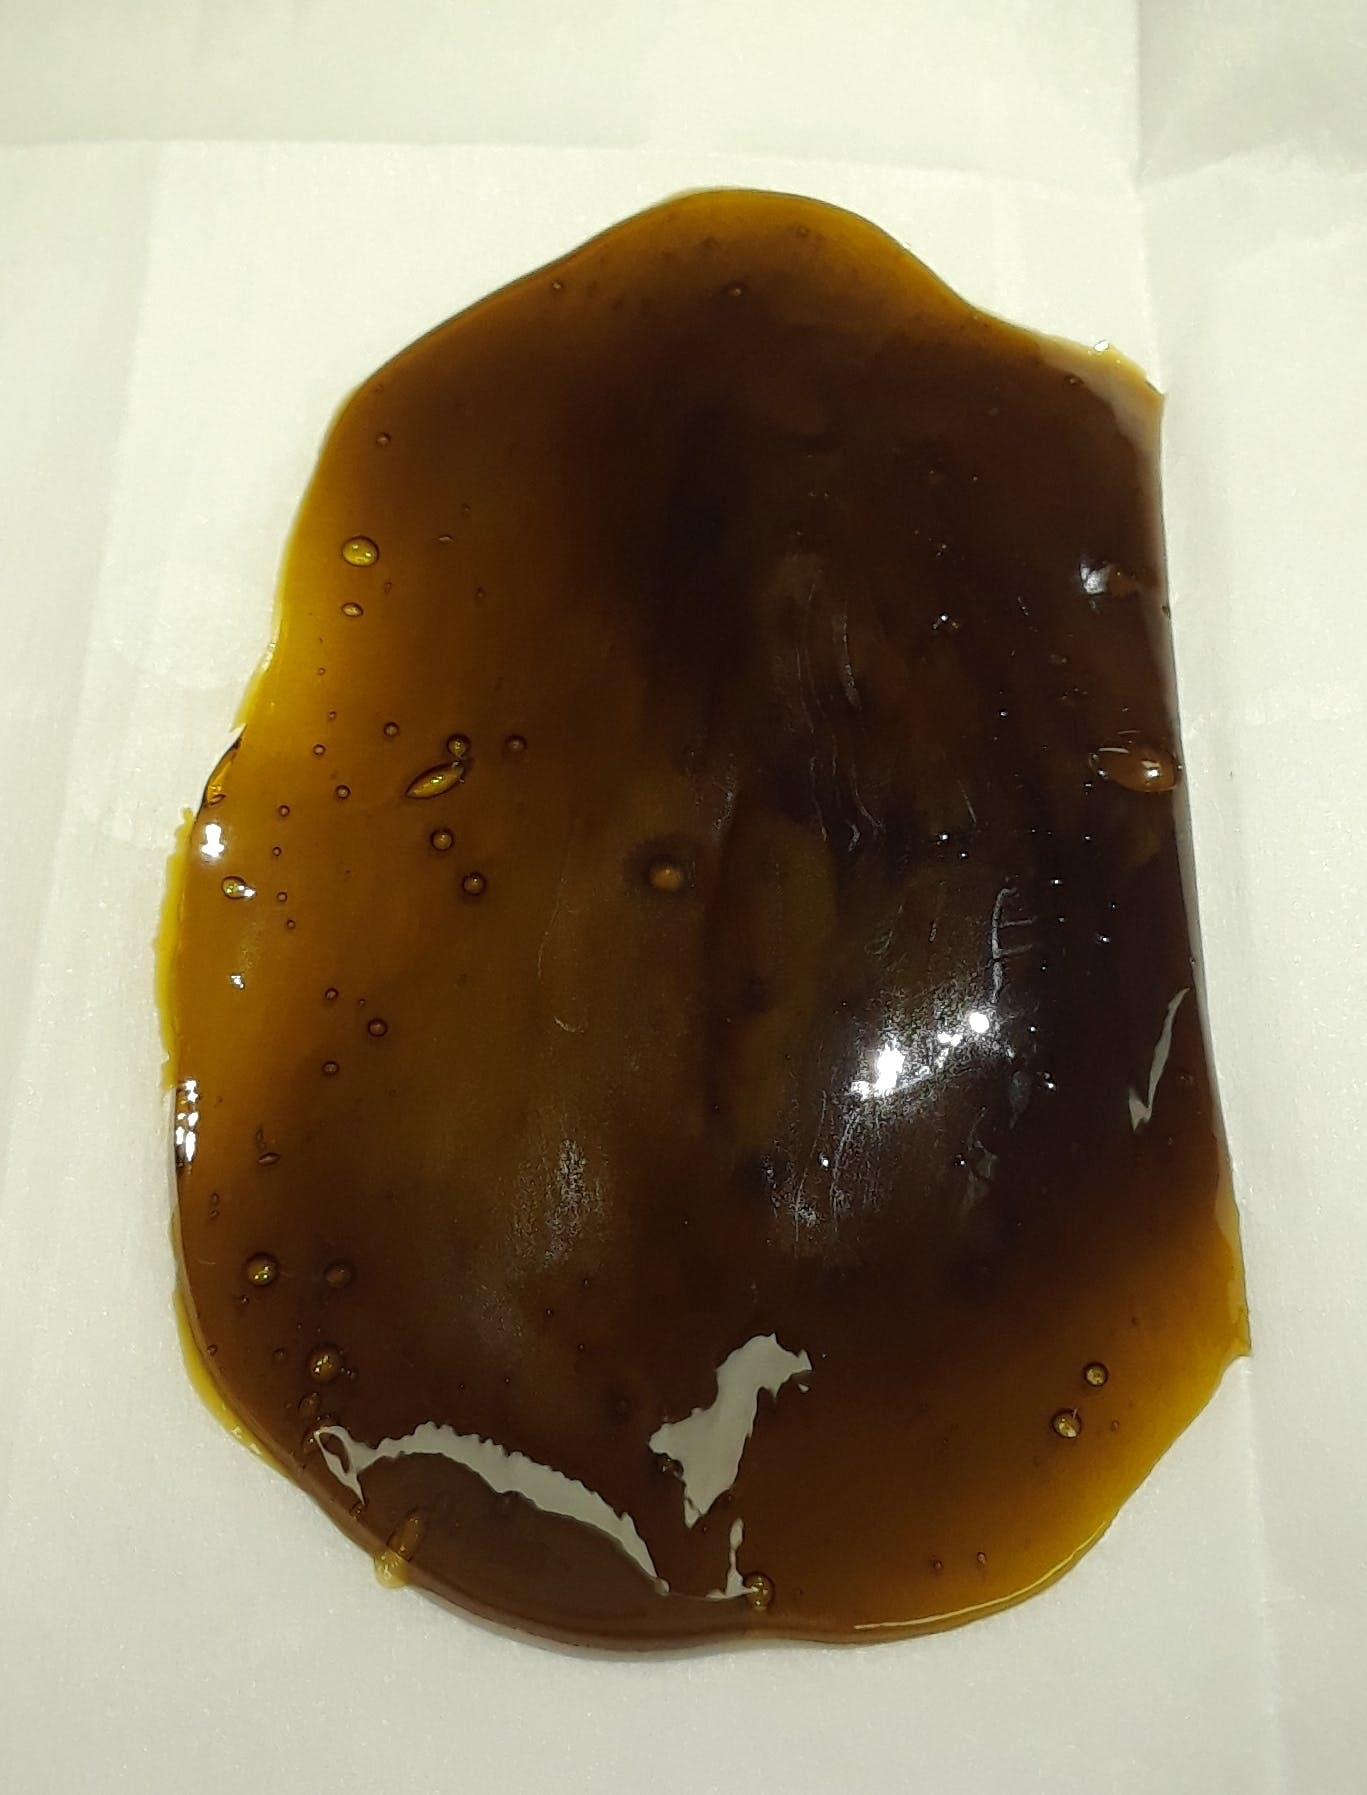 wax-3-5g-of-wax-for-2420